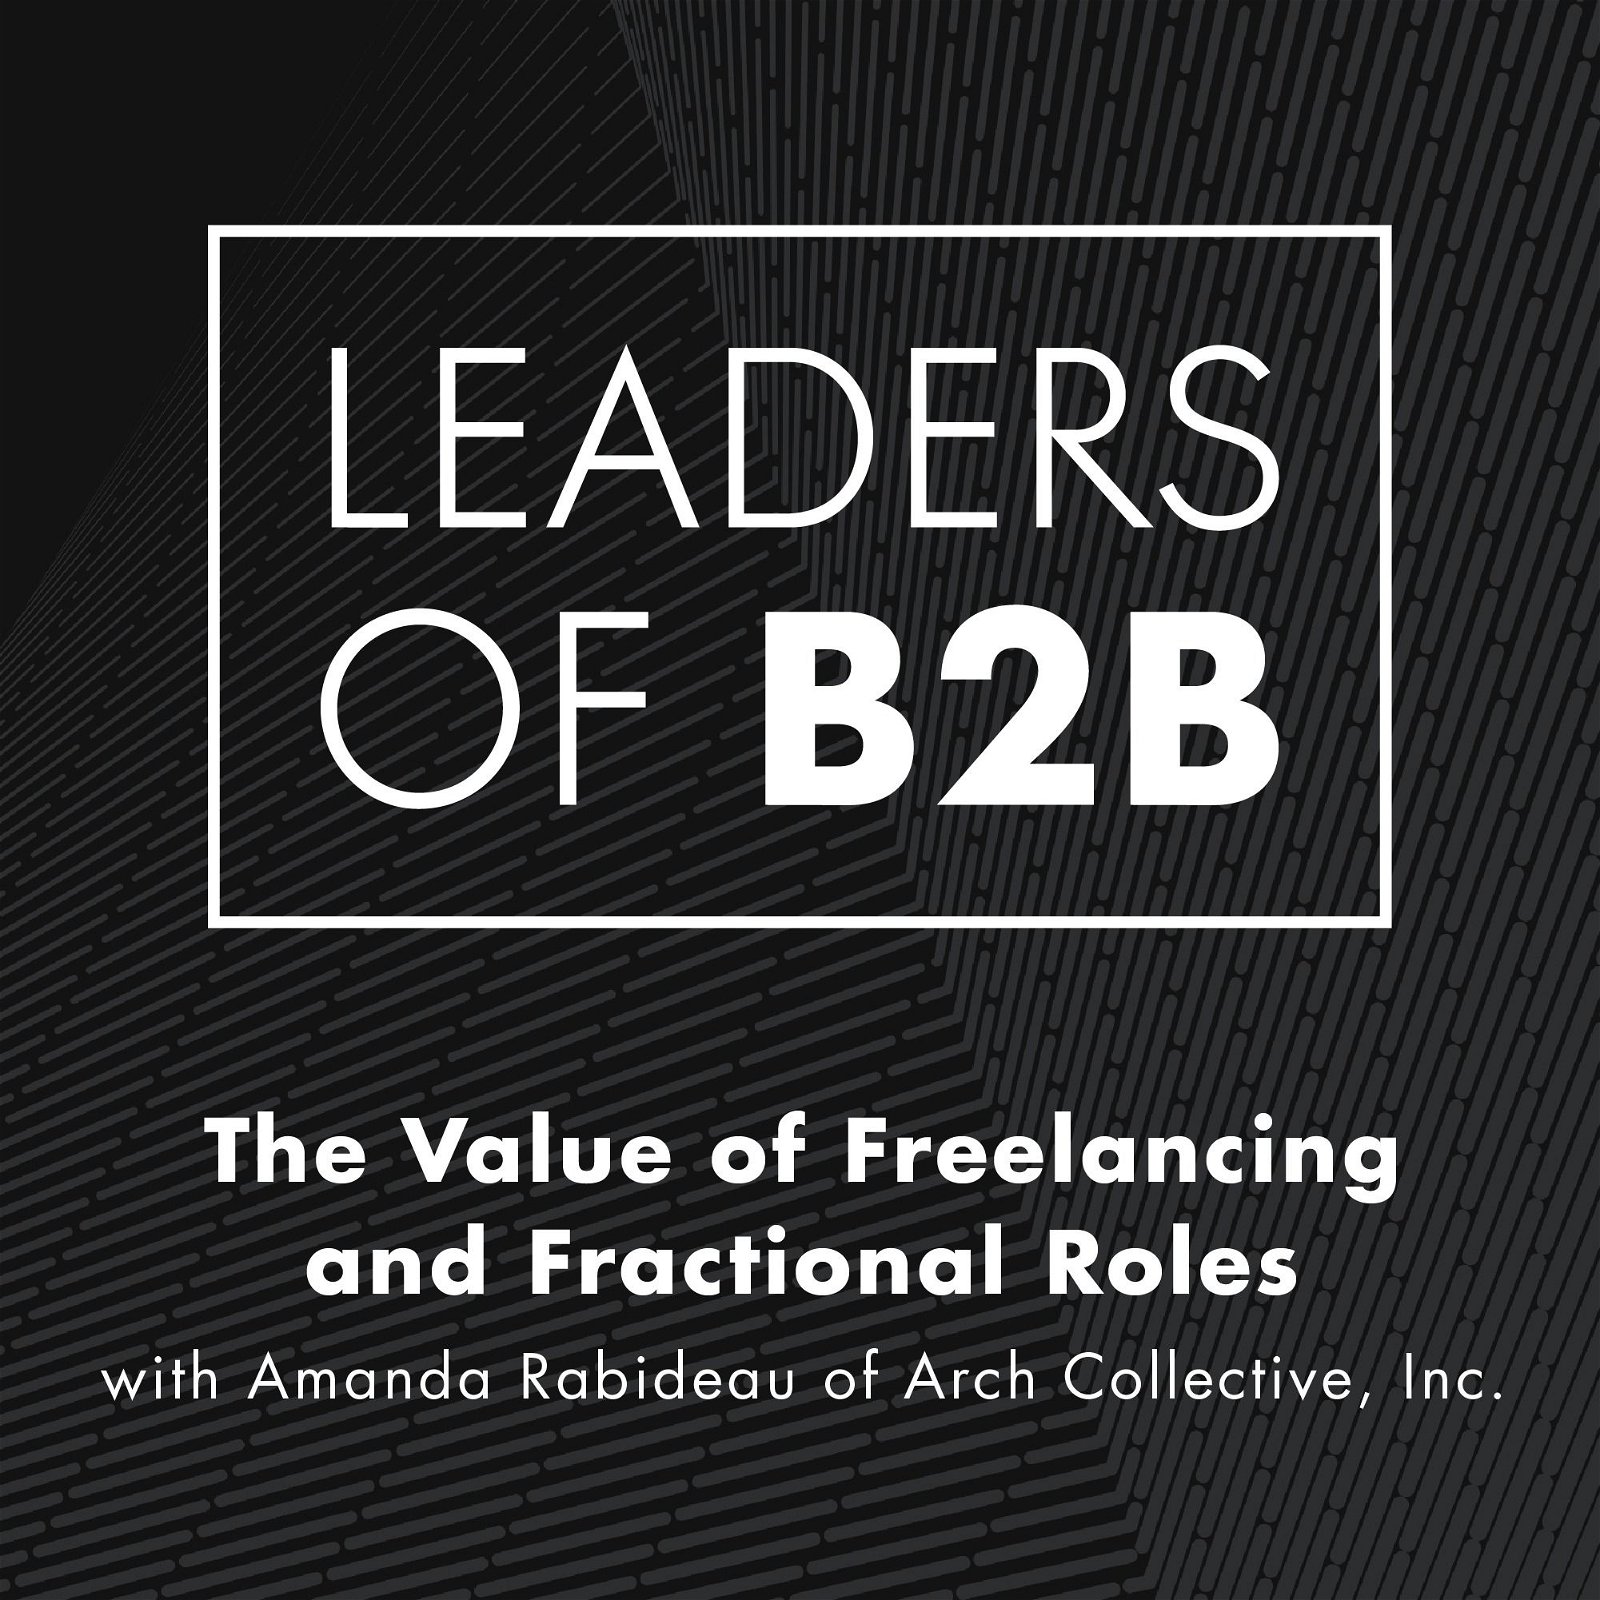 The Value of Freelancing and Fractional Roles with Amanda Rabideau of Arch Collective, Inc.